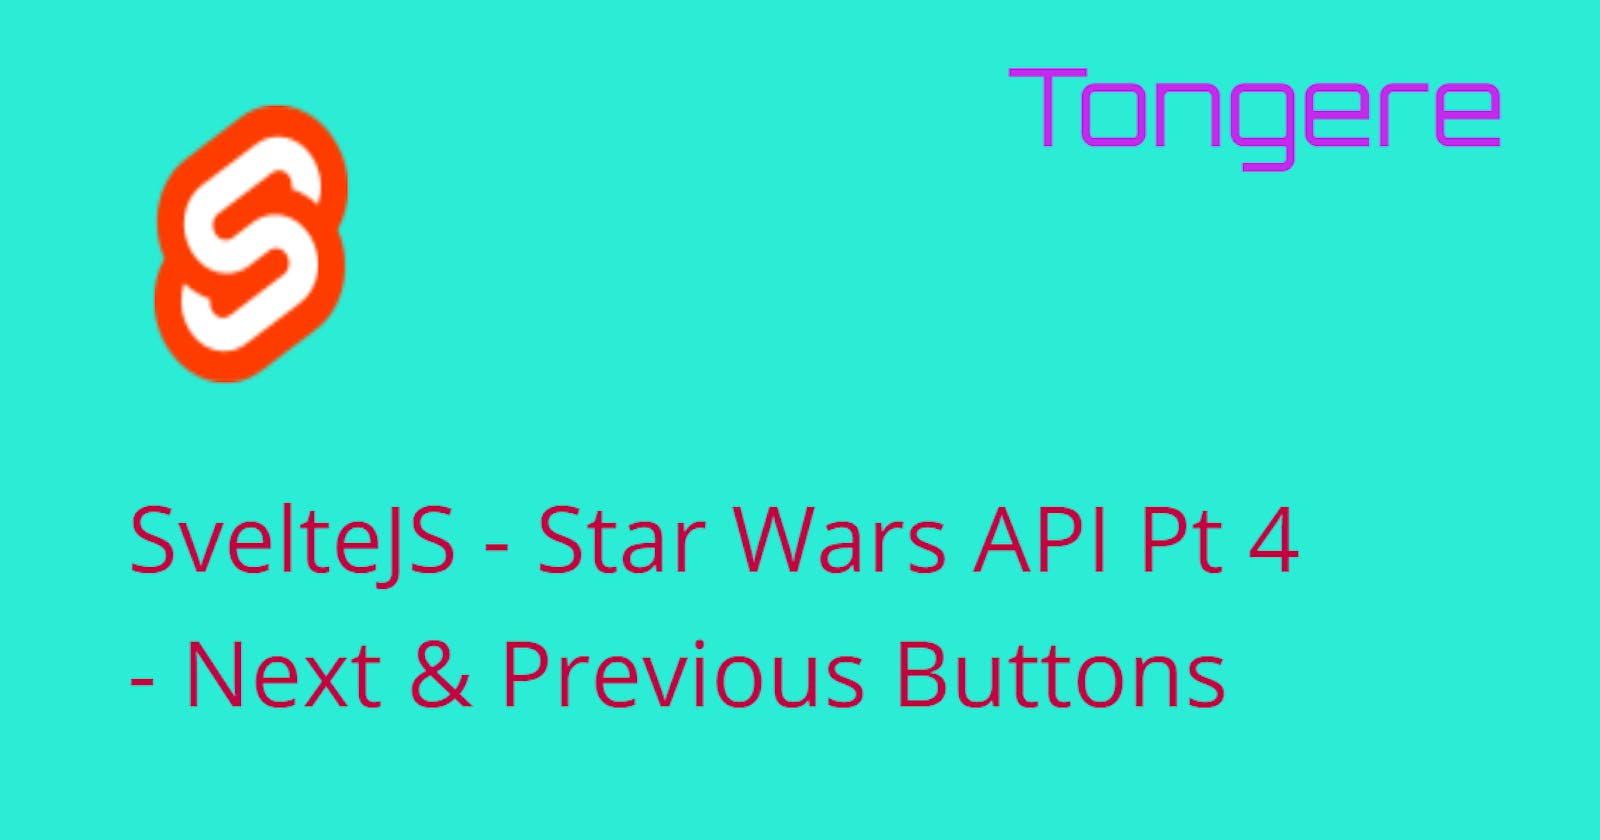 Svelte App using the Star Wars API Pt 4, Next and Previous Buttons